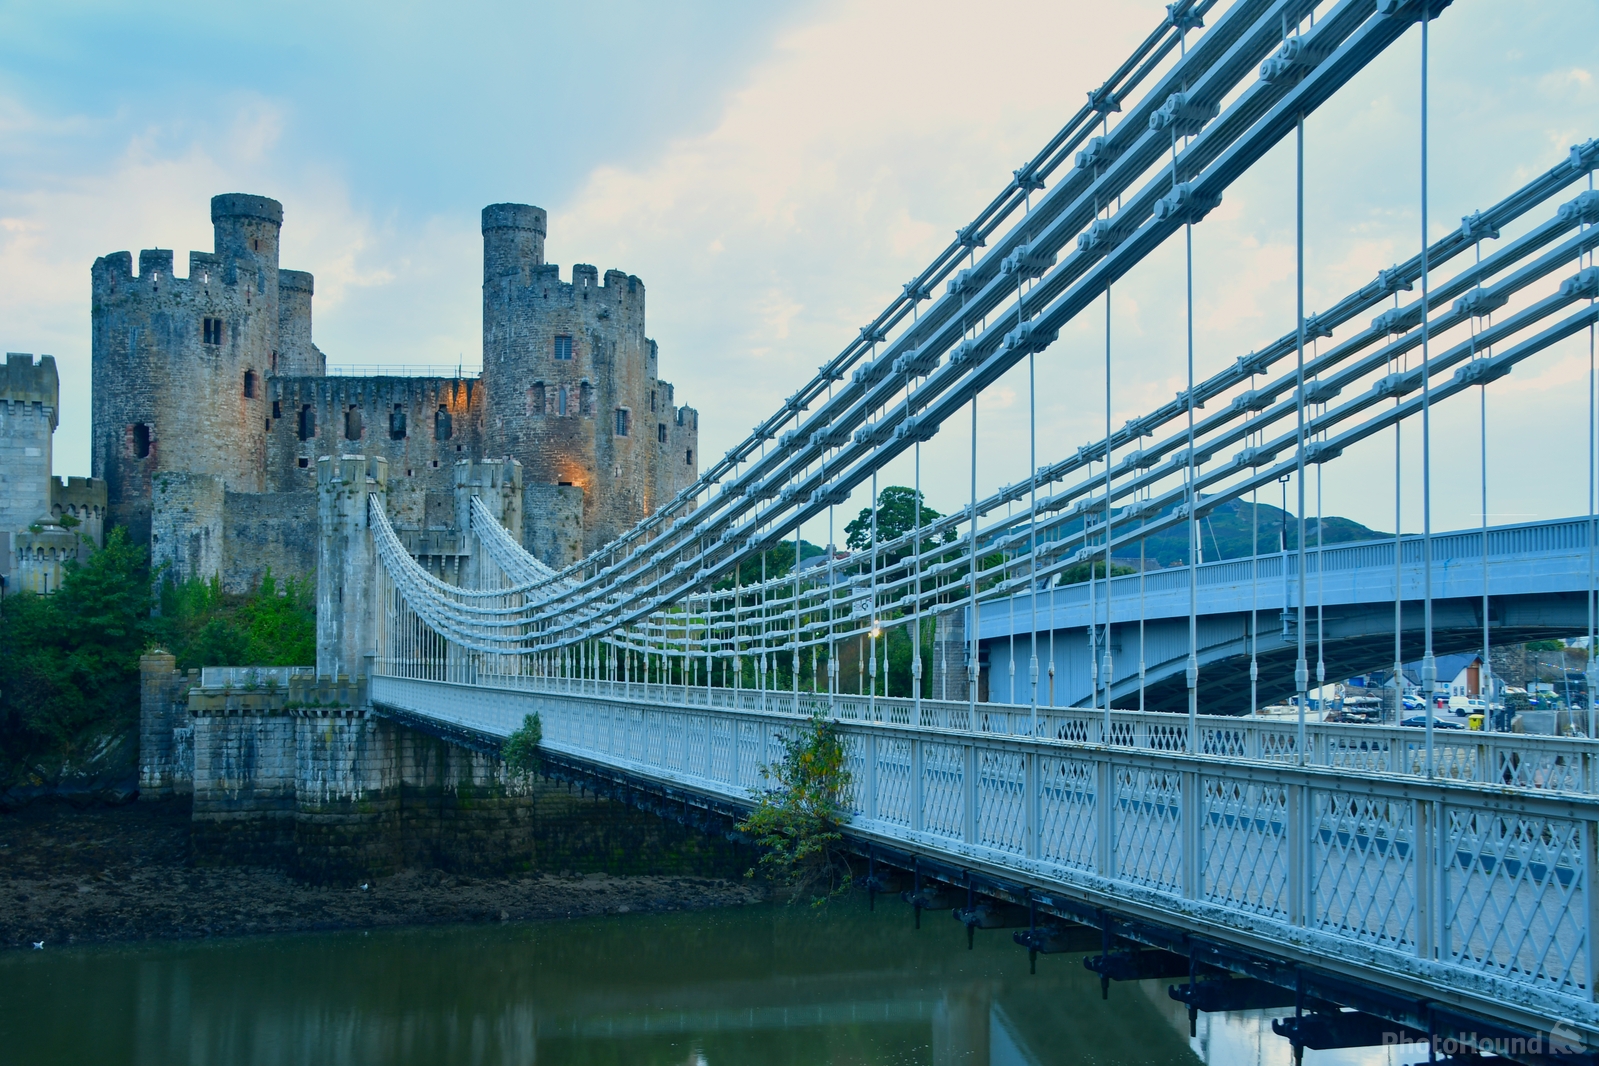 Image of Conwy Castle & Bridge by Philip Eptlett